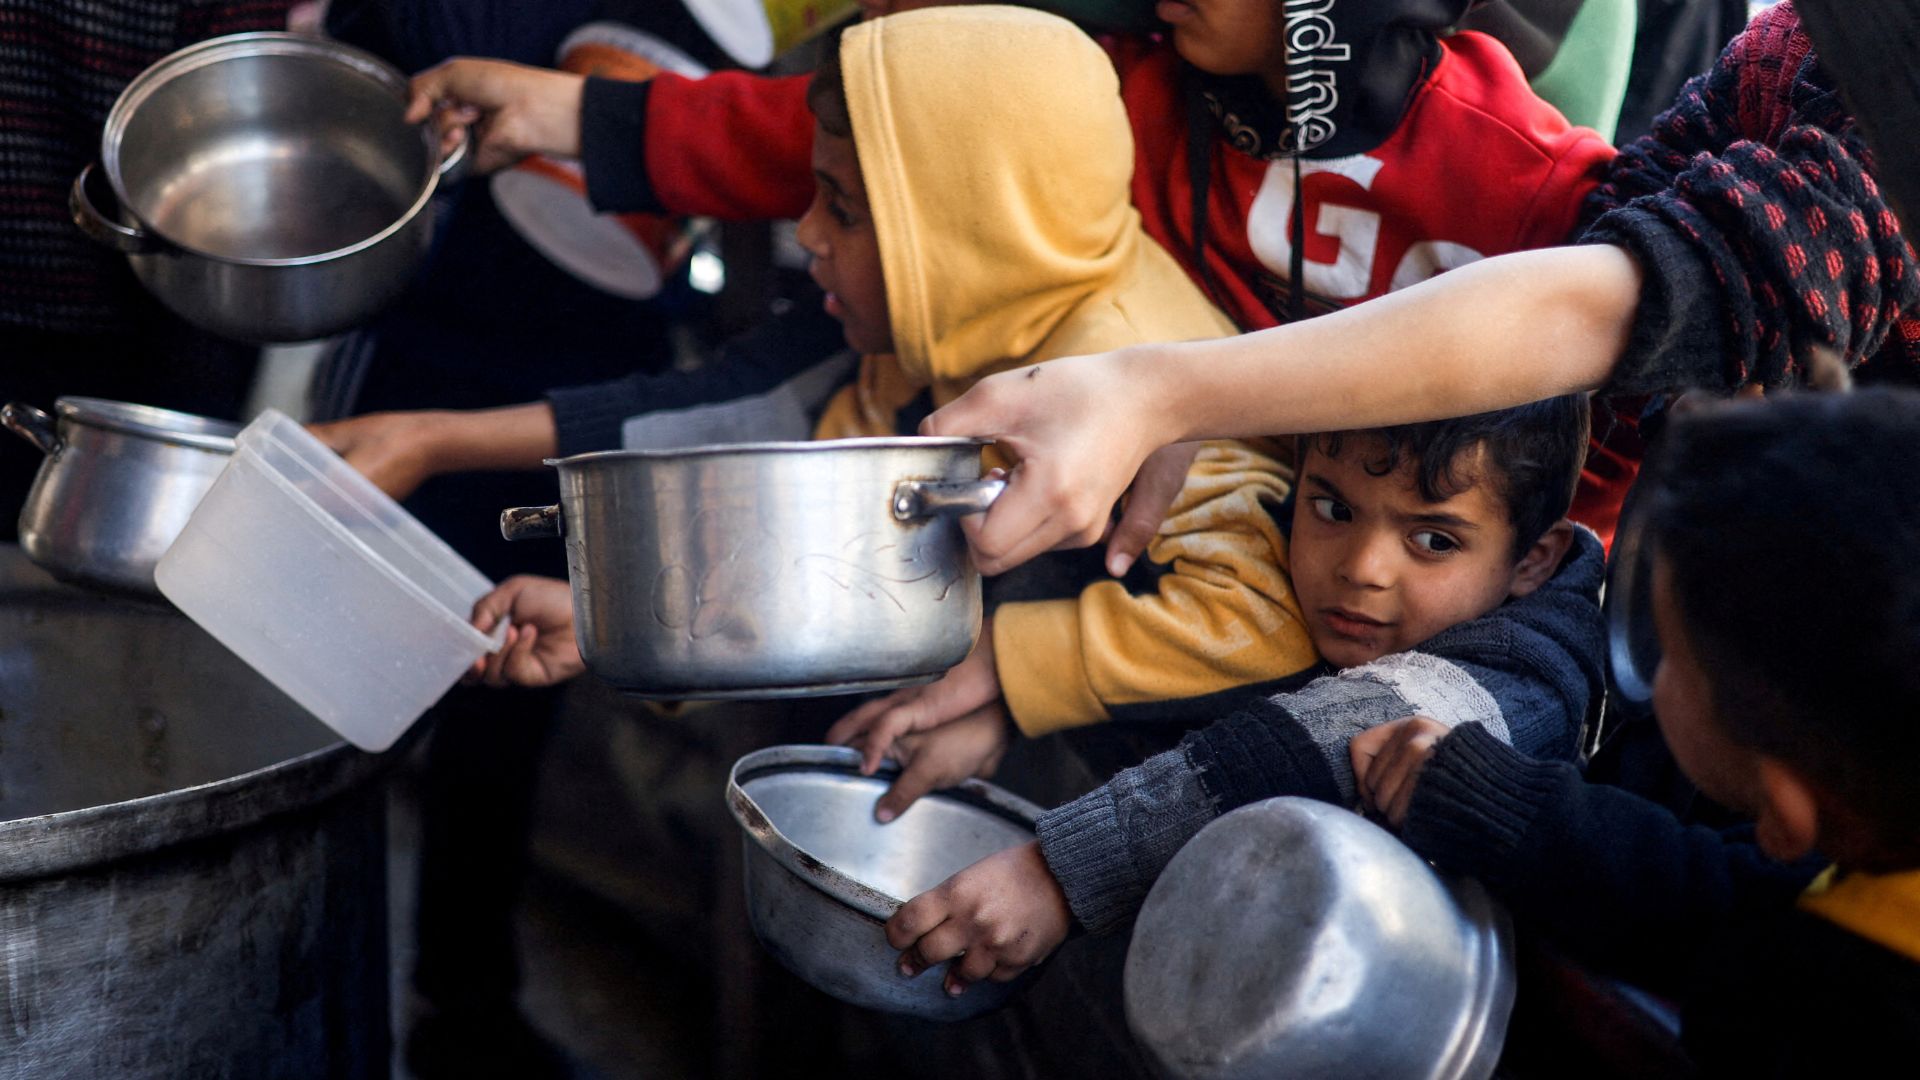 Palestinian children wait to receive food cooked by a charity kitchen amid shortages of food supplies. /Mohammed Salem/Reuters
